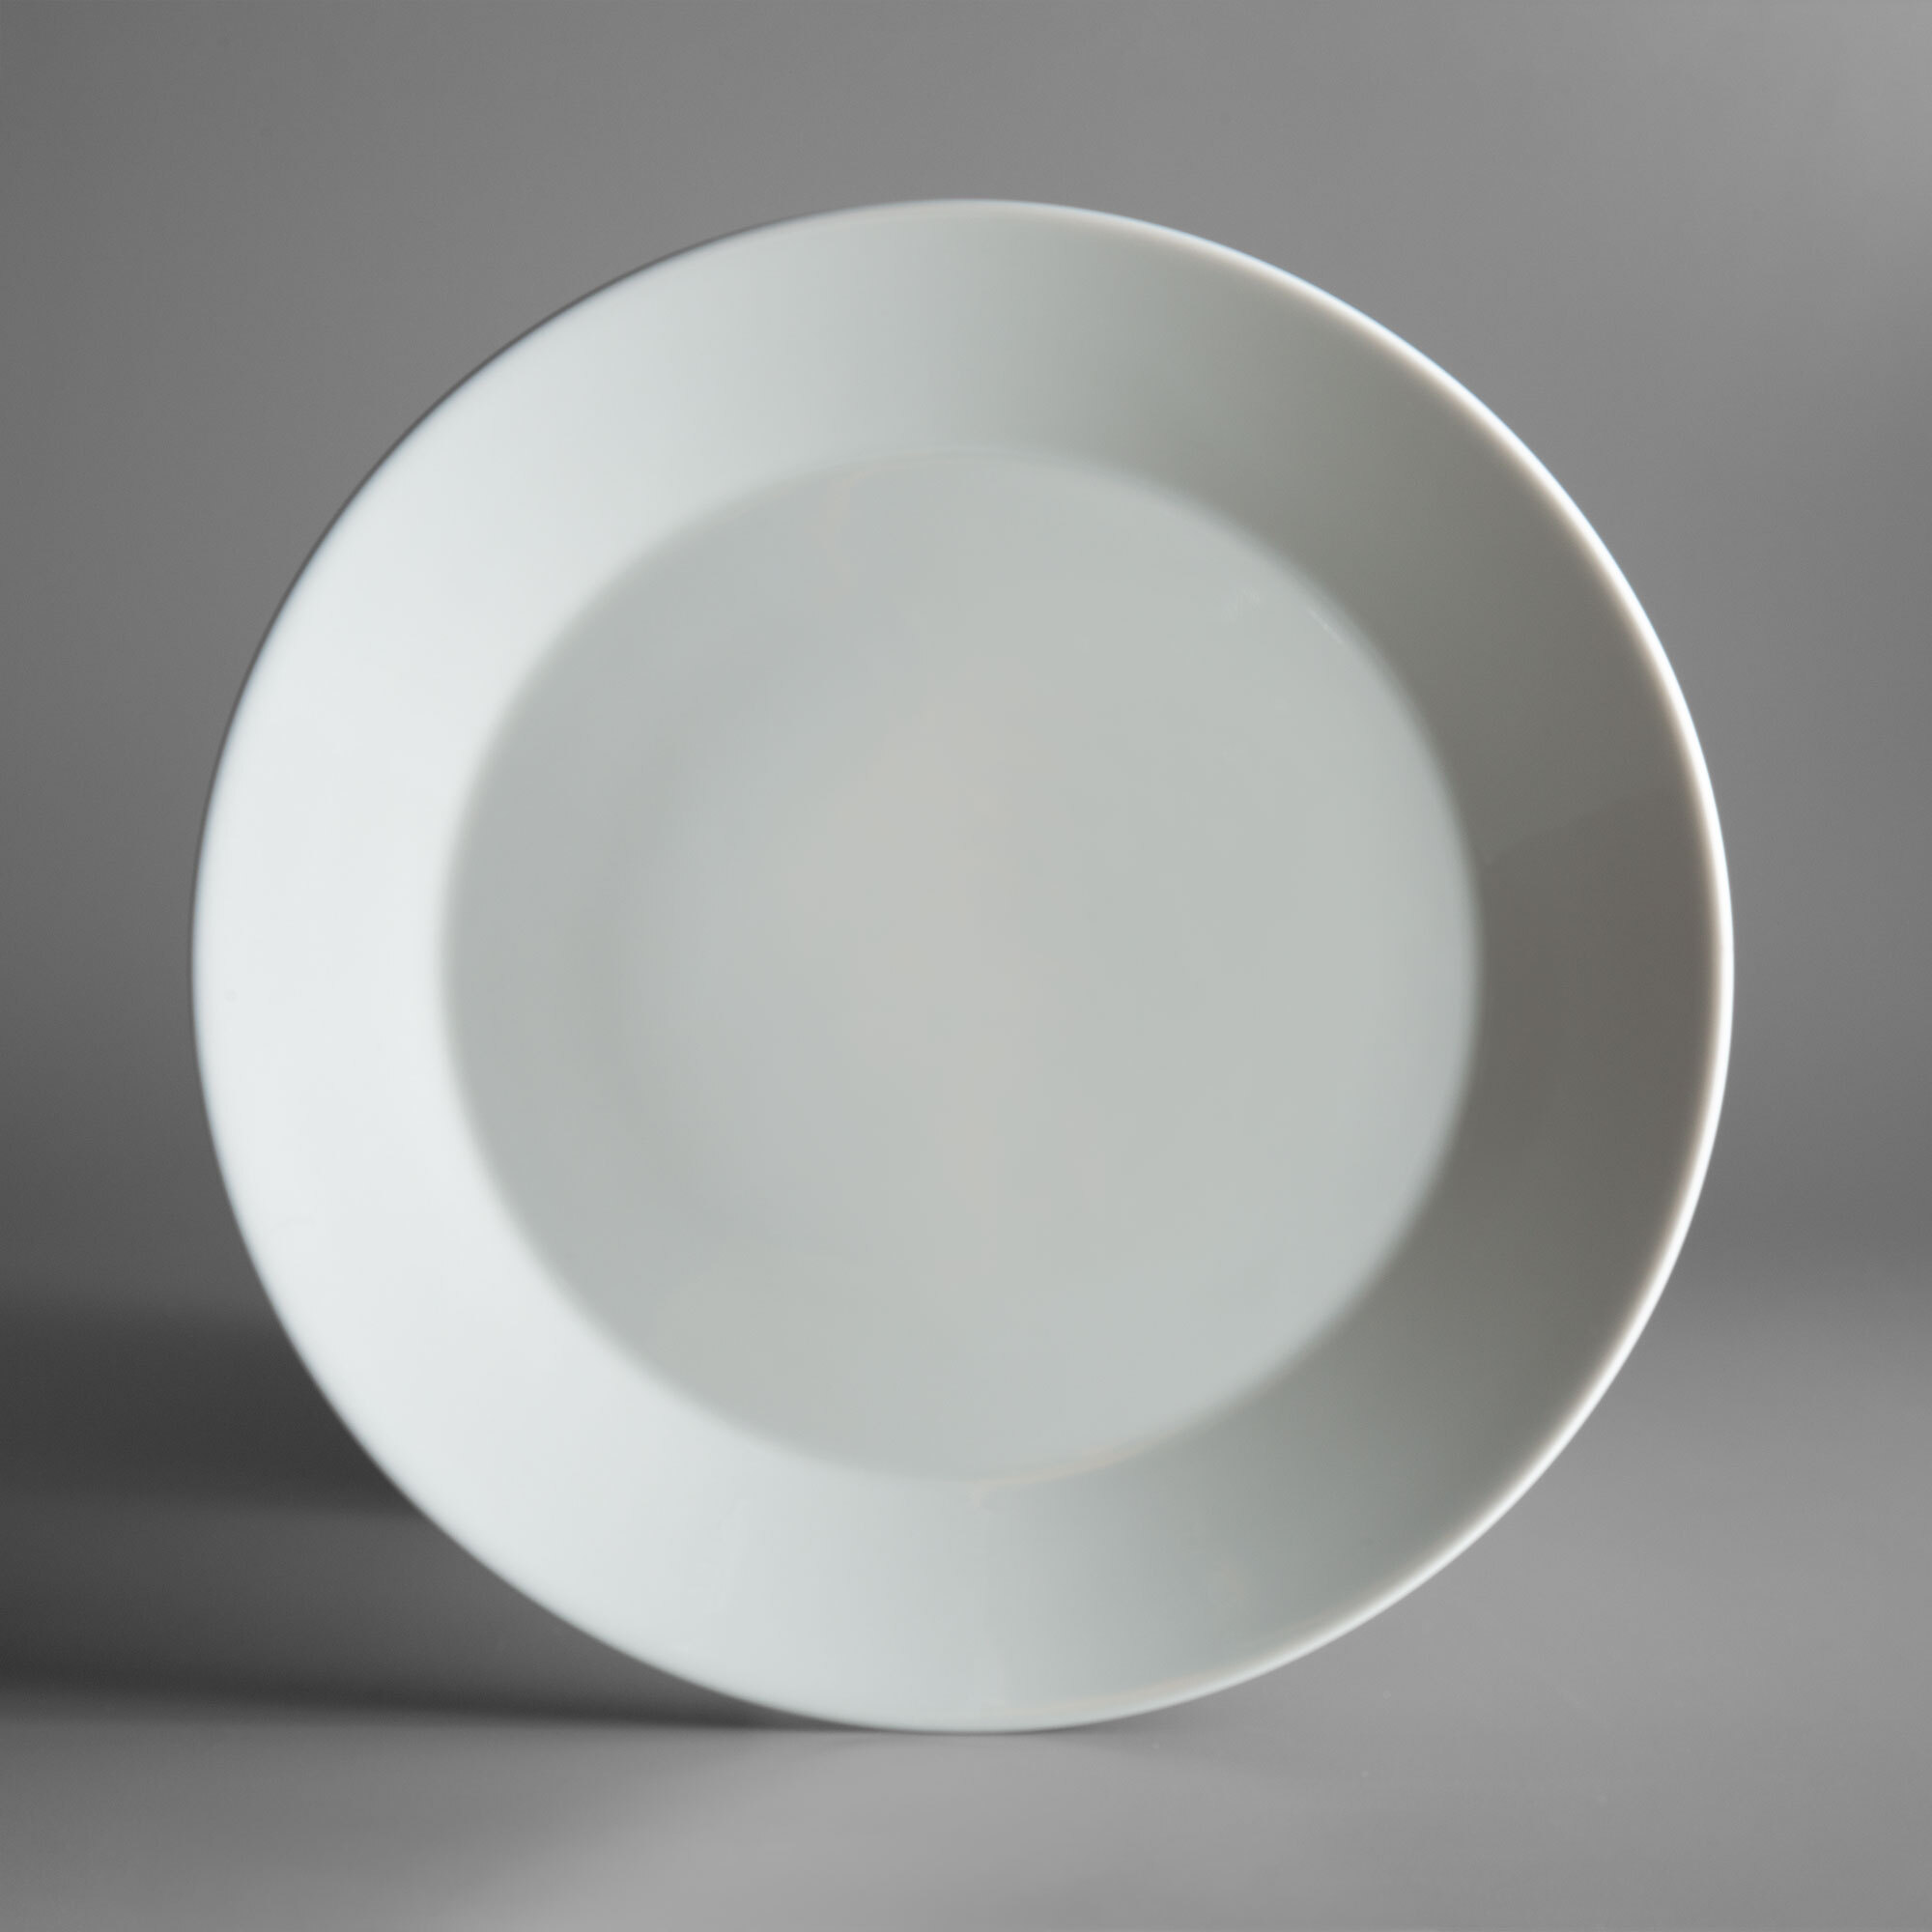 Schonwald 9401228 Connect 11 Continental White Porcelain White